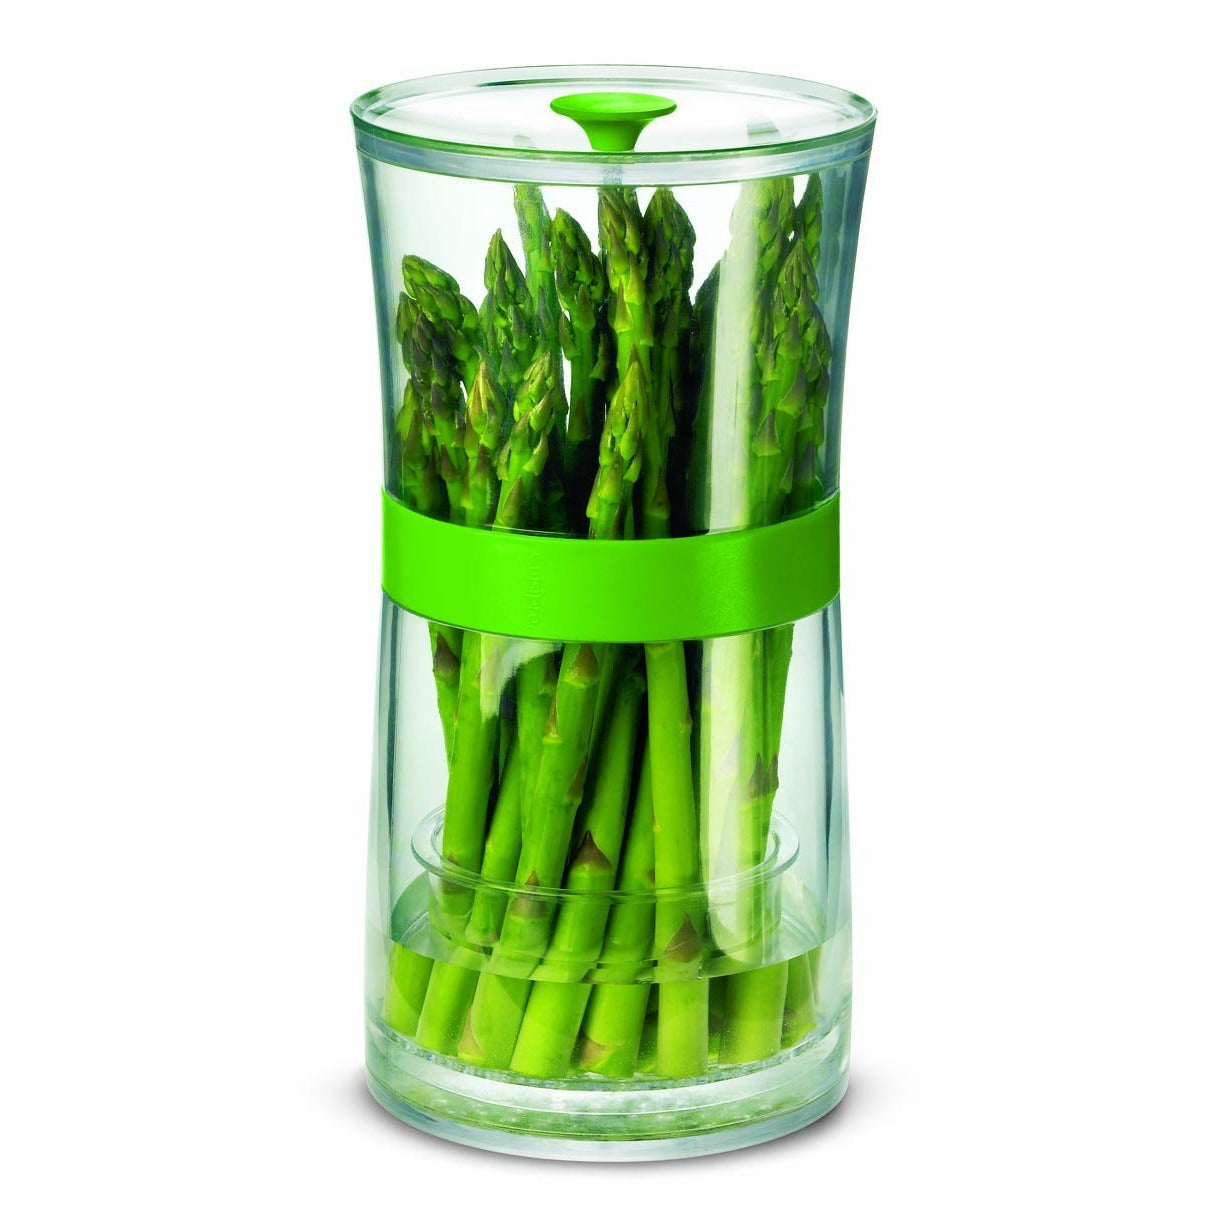 OXO GreenSaver Herb Keeper - Large